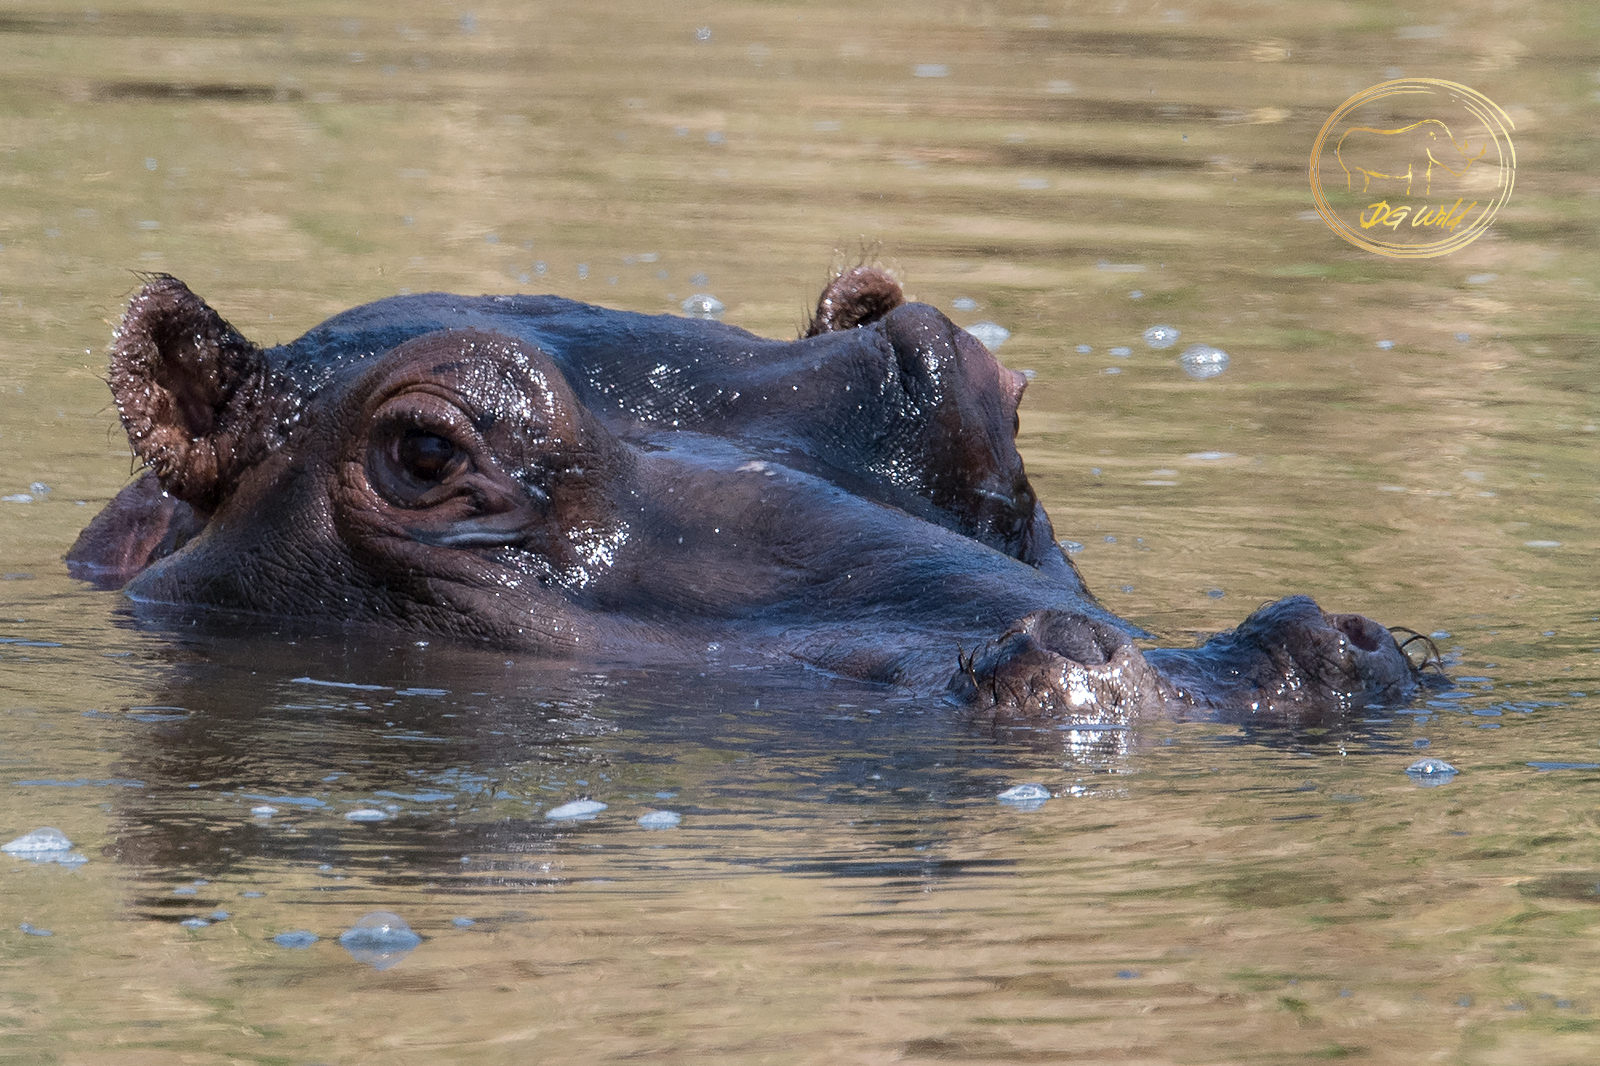 a hippo in the water